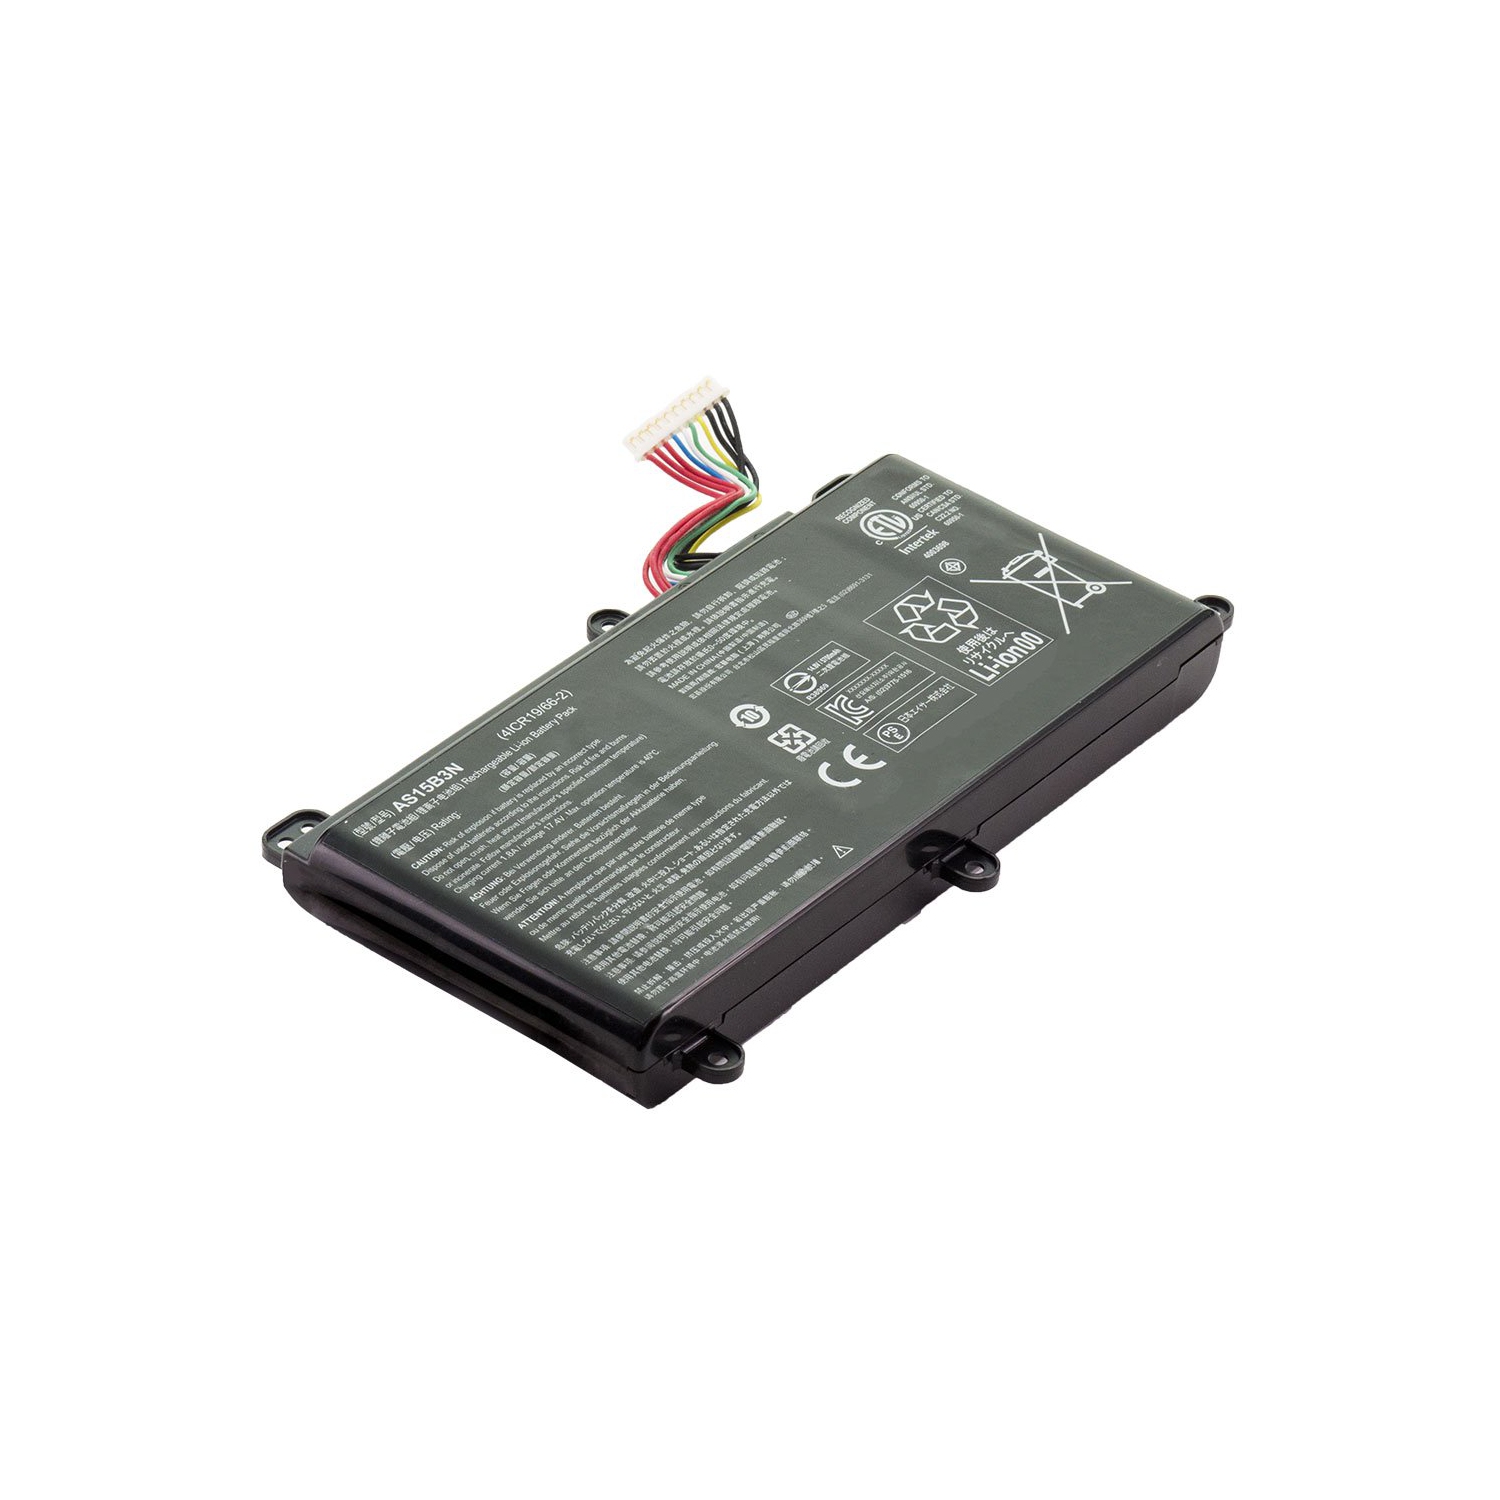 Laptop Battery Replacement for Acer Predator 15 G9-593-765Q, AS15B3N, KT.00803.004, KT.00803.005